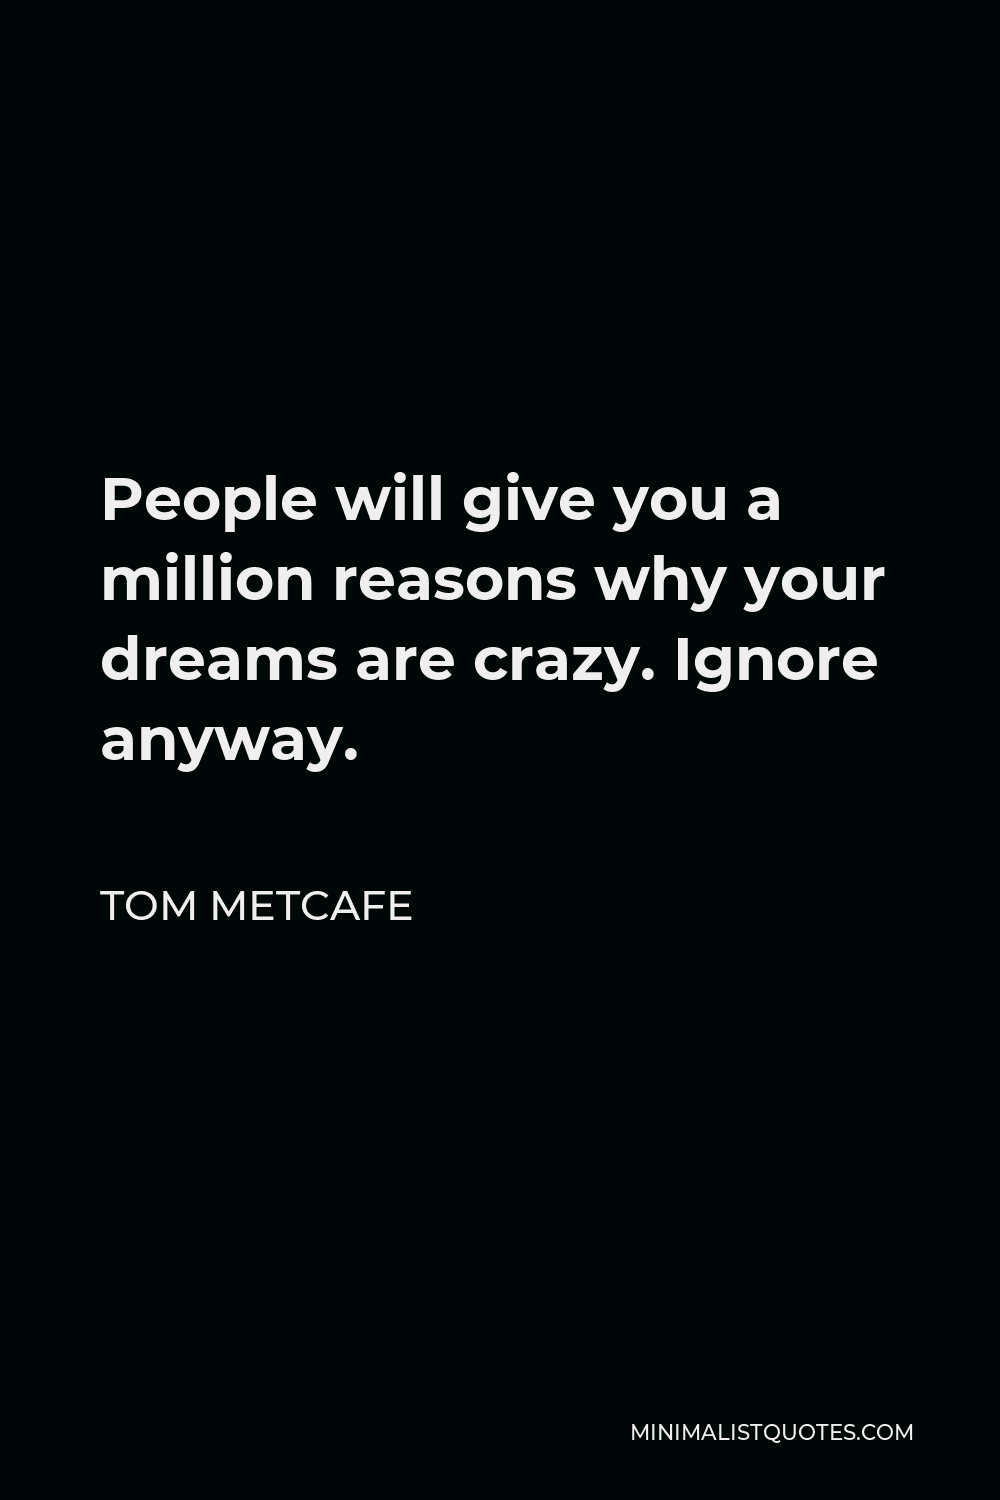 Tom Metcafe Quote - People will give you a million reasons why your dreams are crazy. Ignore anyway.